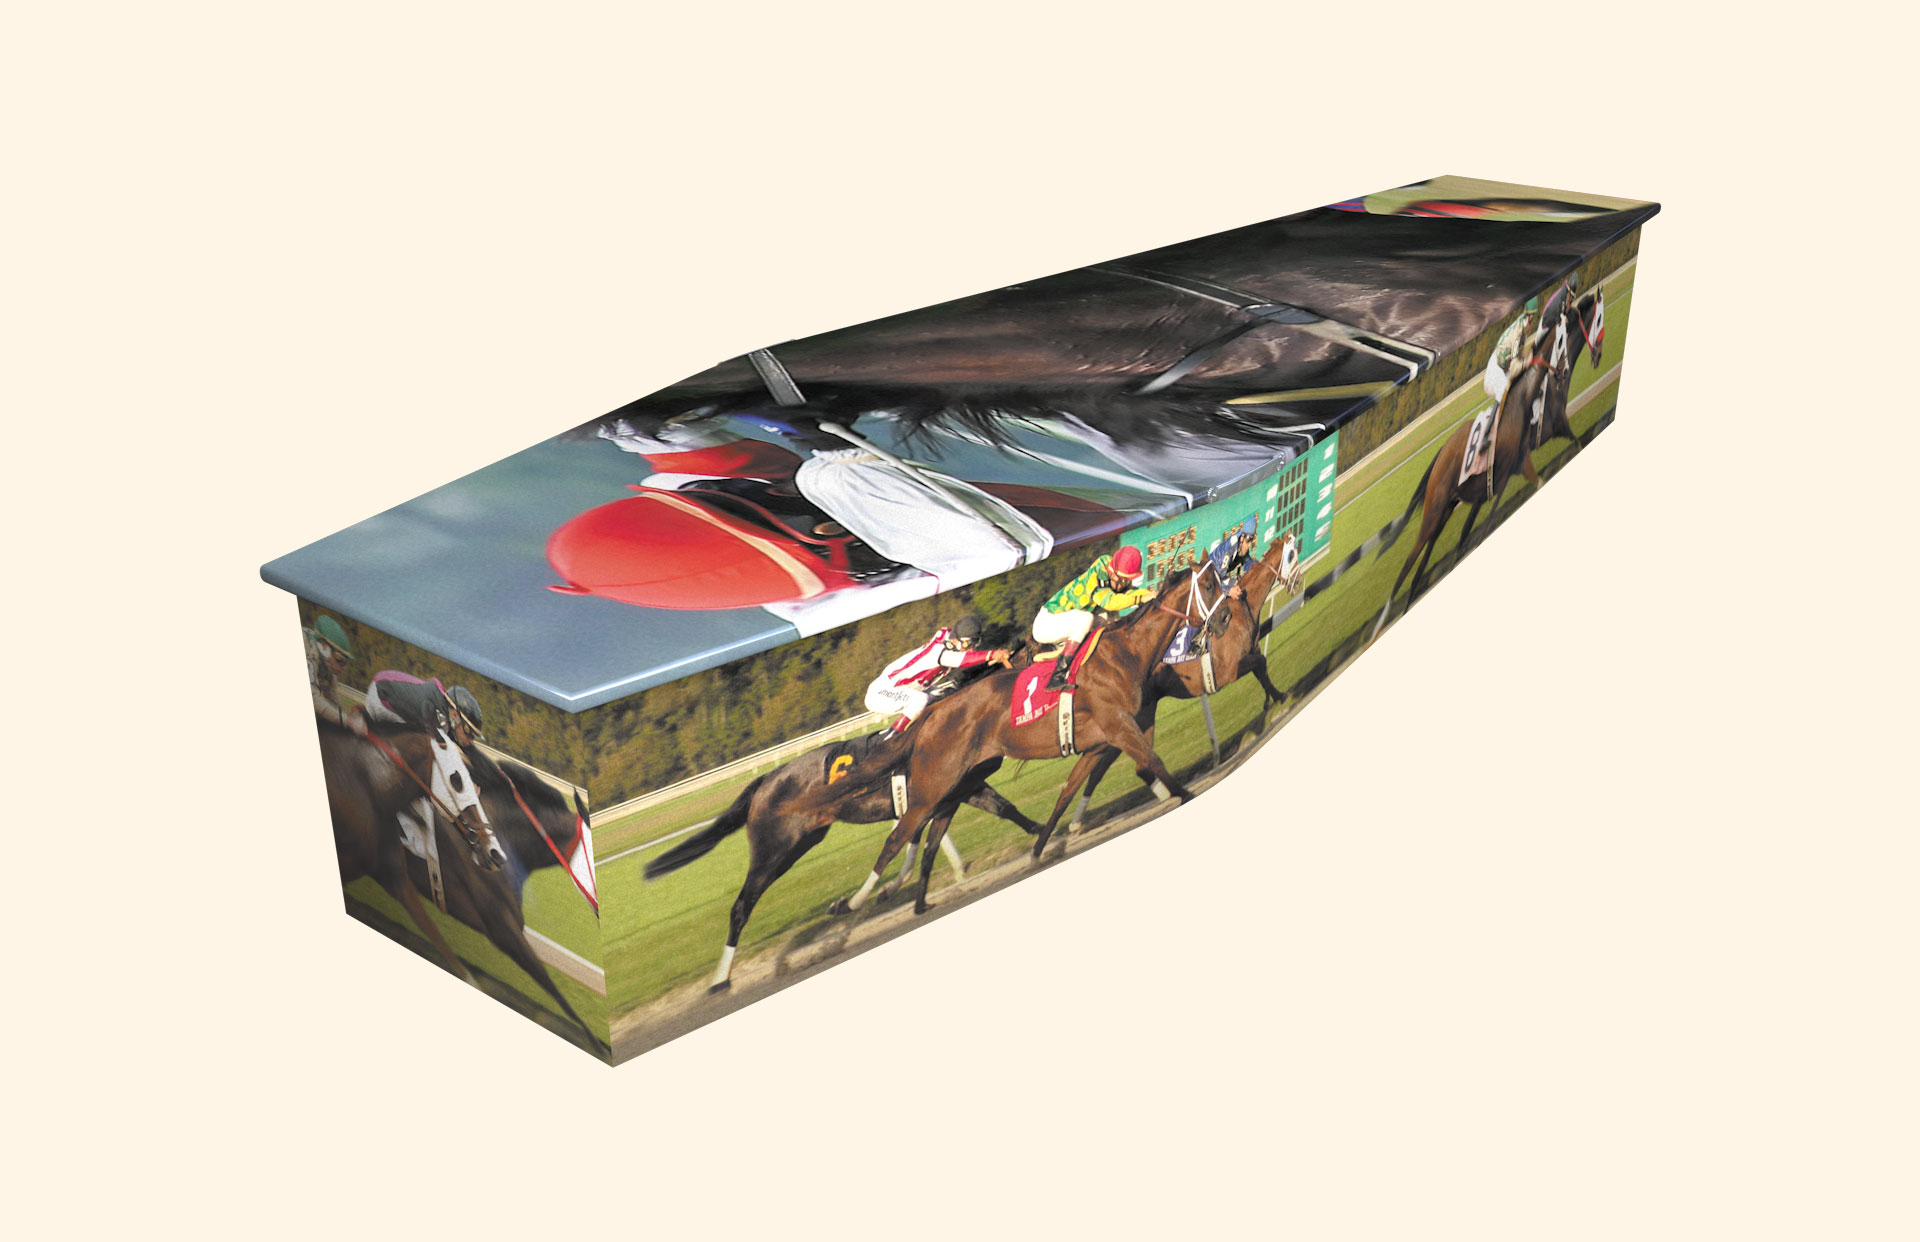 Horse Racing design on a traditional coffin